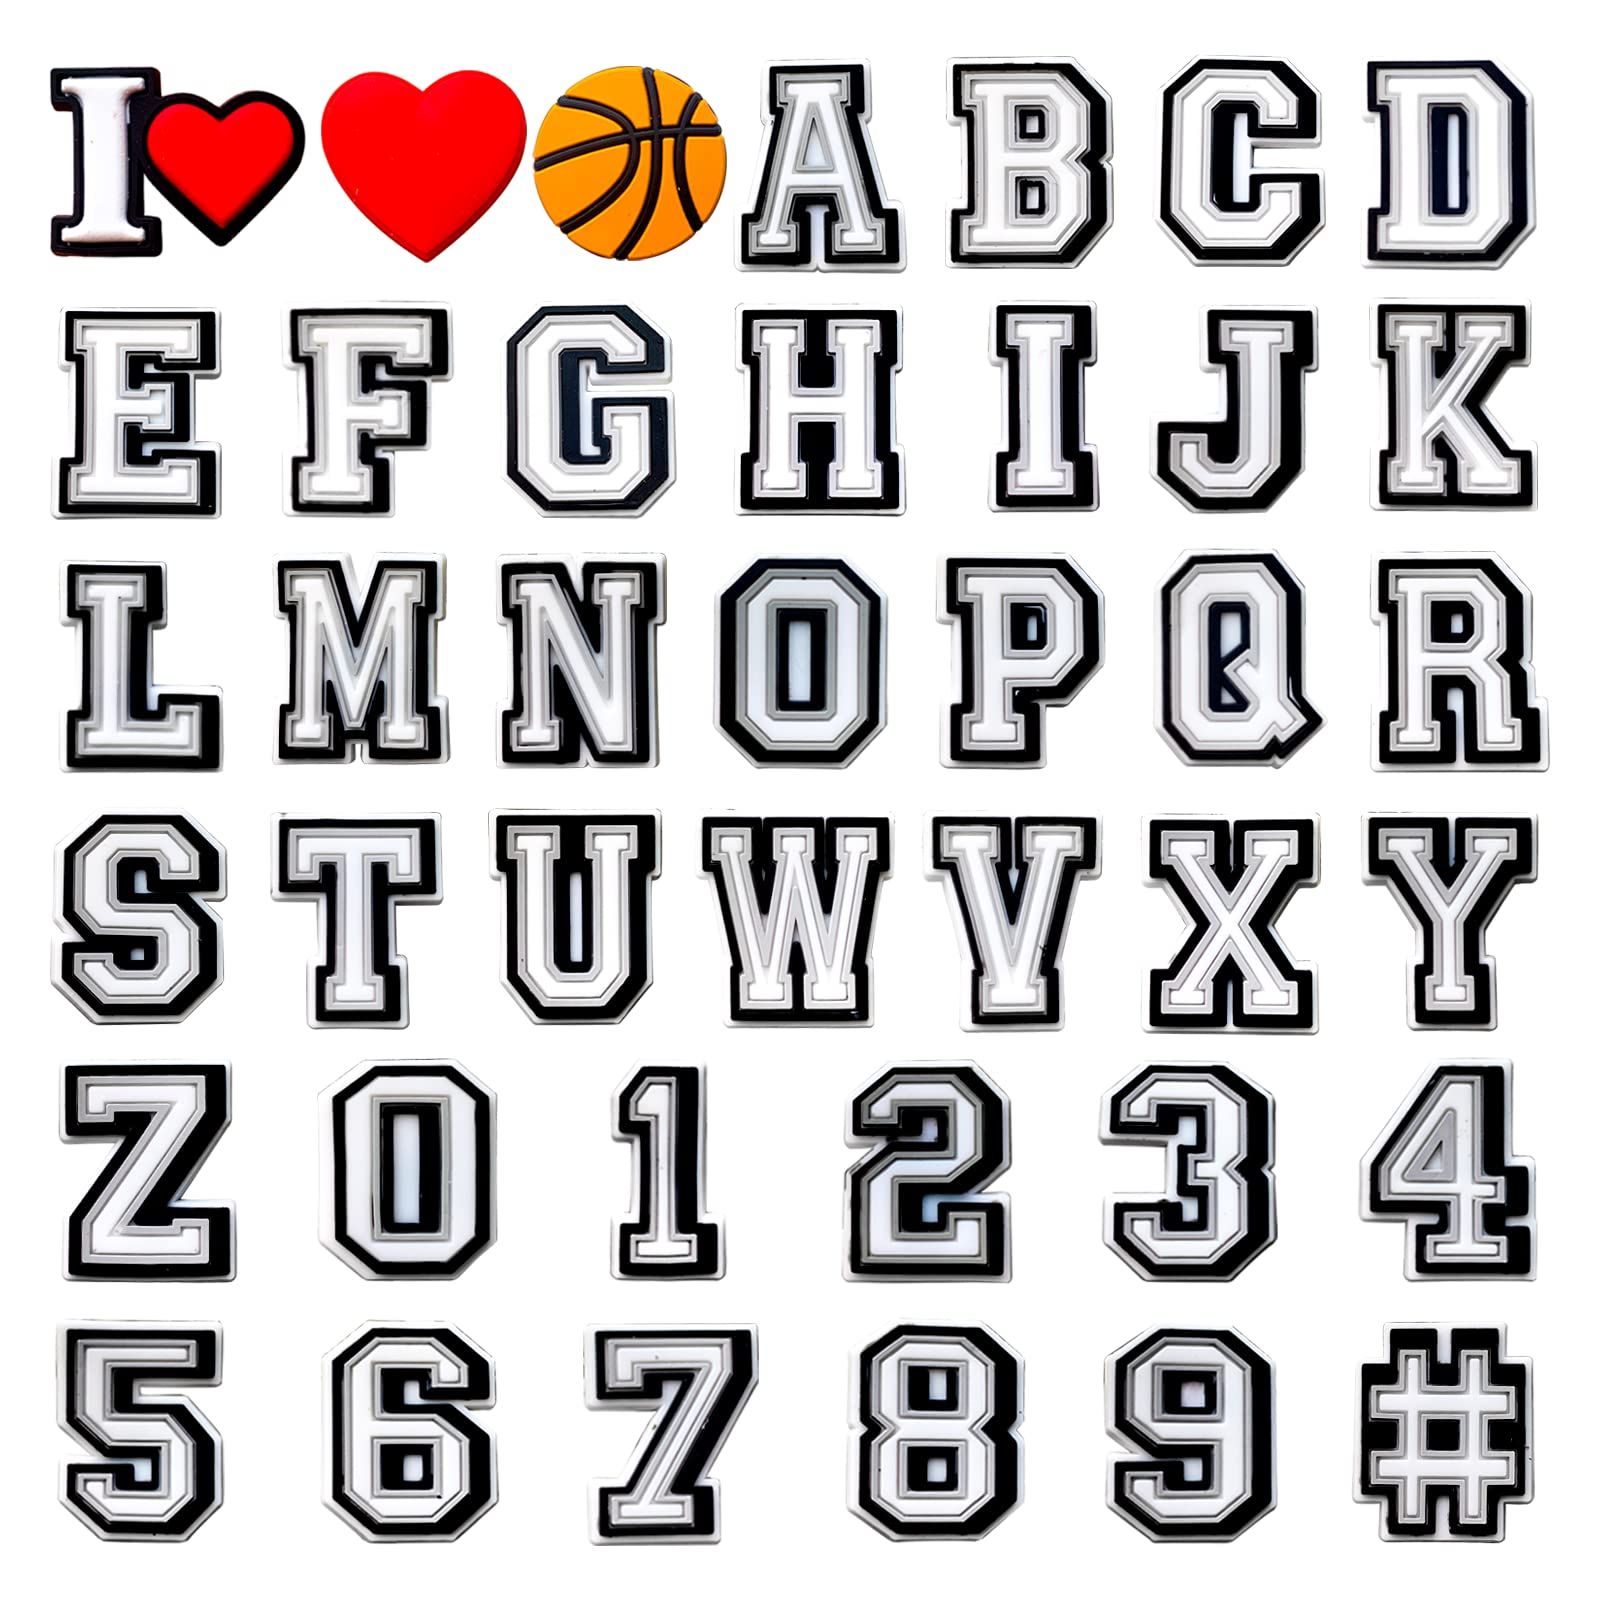 Shoe Parts Accessories Letter Croc Charms Pack For Decoration 09 Number  Alphabet Abcz Characters Love Heart Basketball Designer Shoe Ot637 From  Zcroccharmstore, $0.06